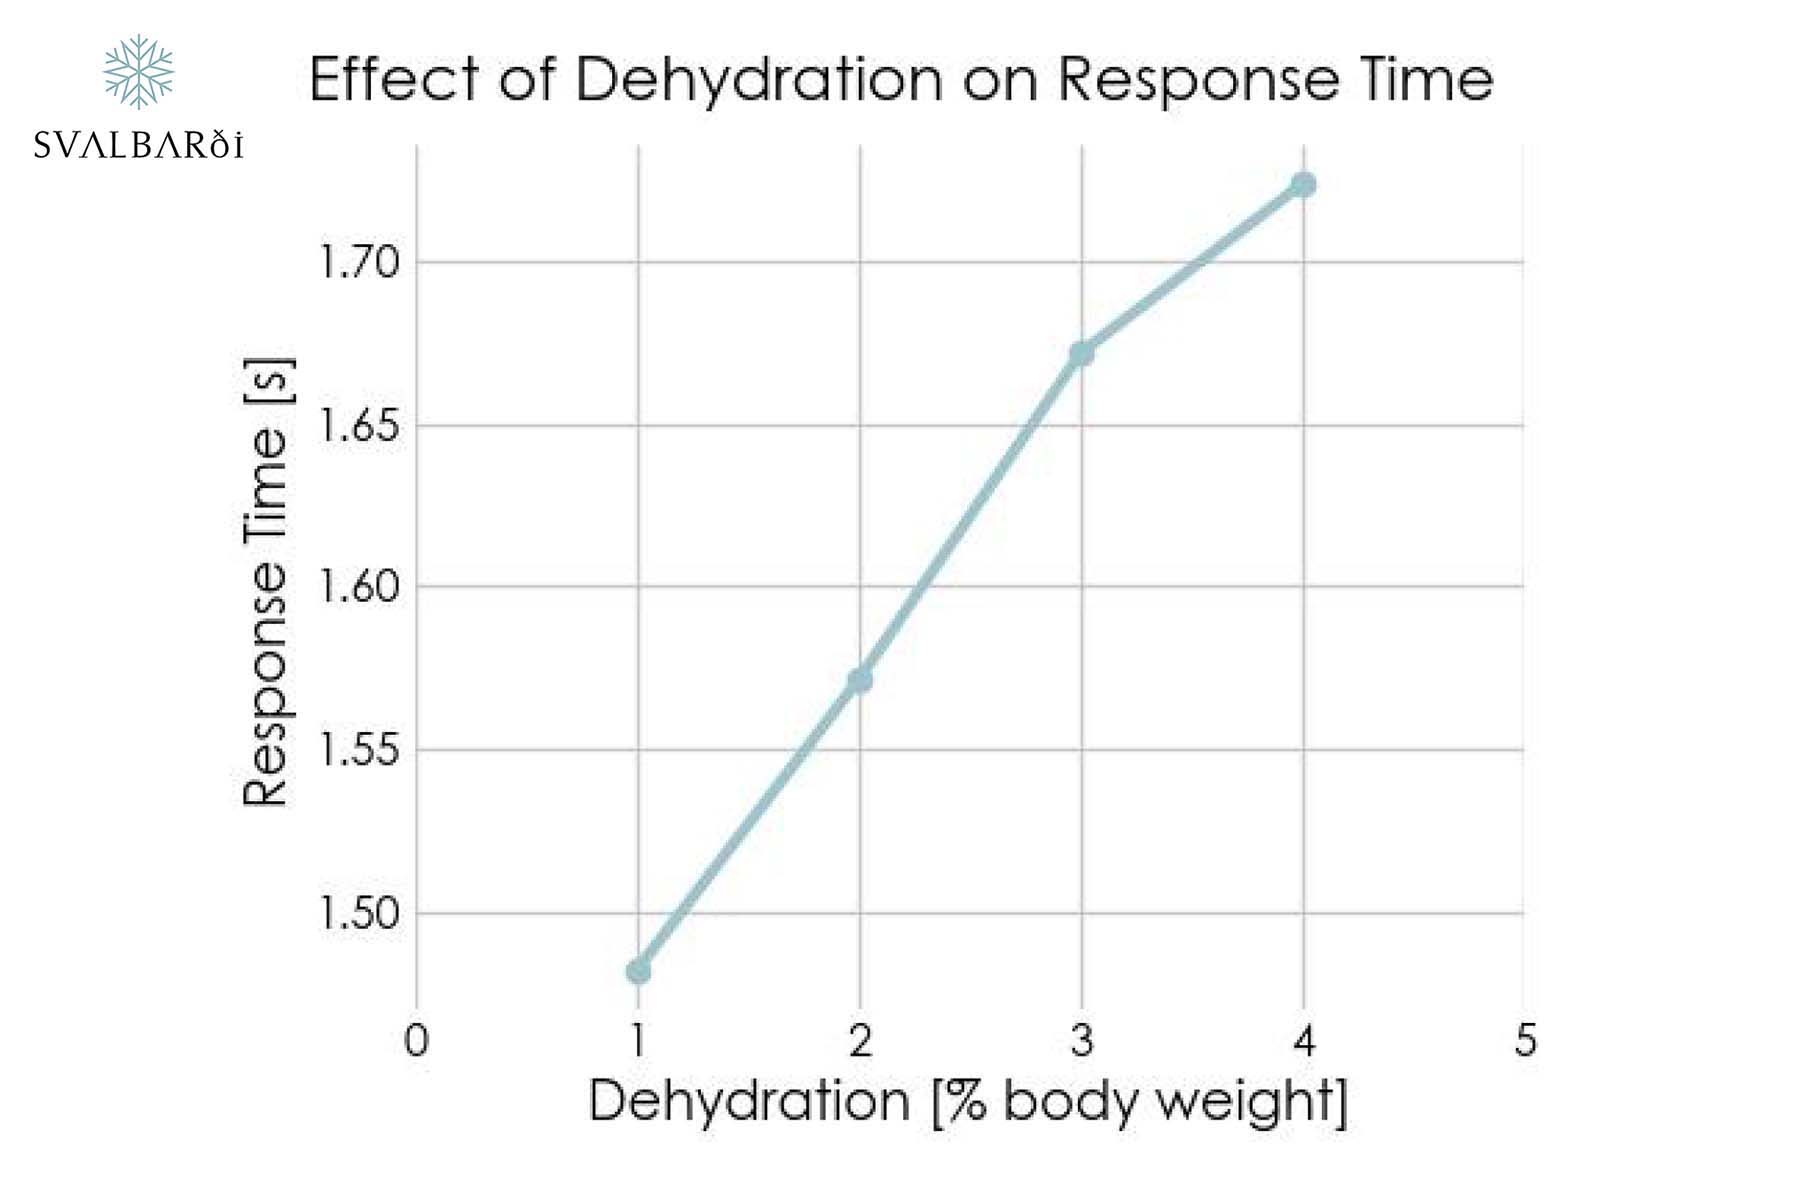 Effect of Dehydration on Response Time